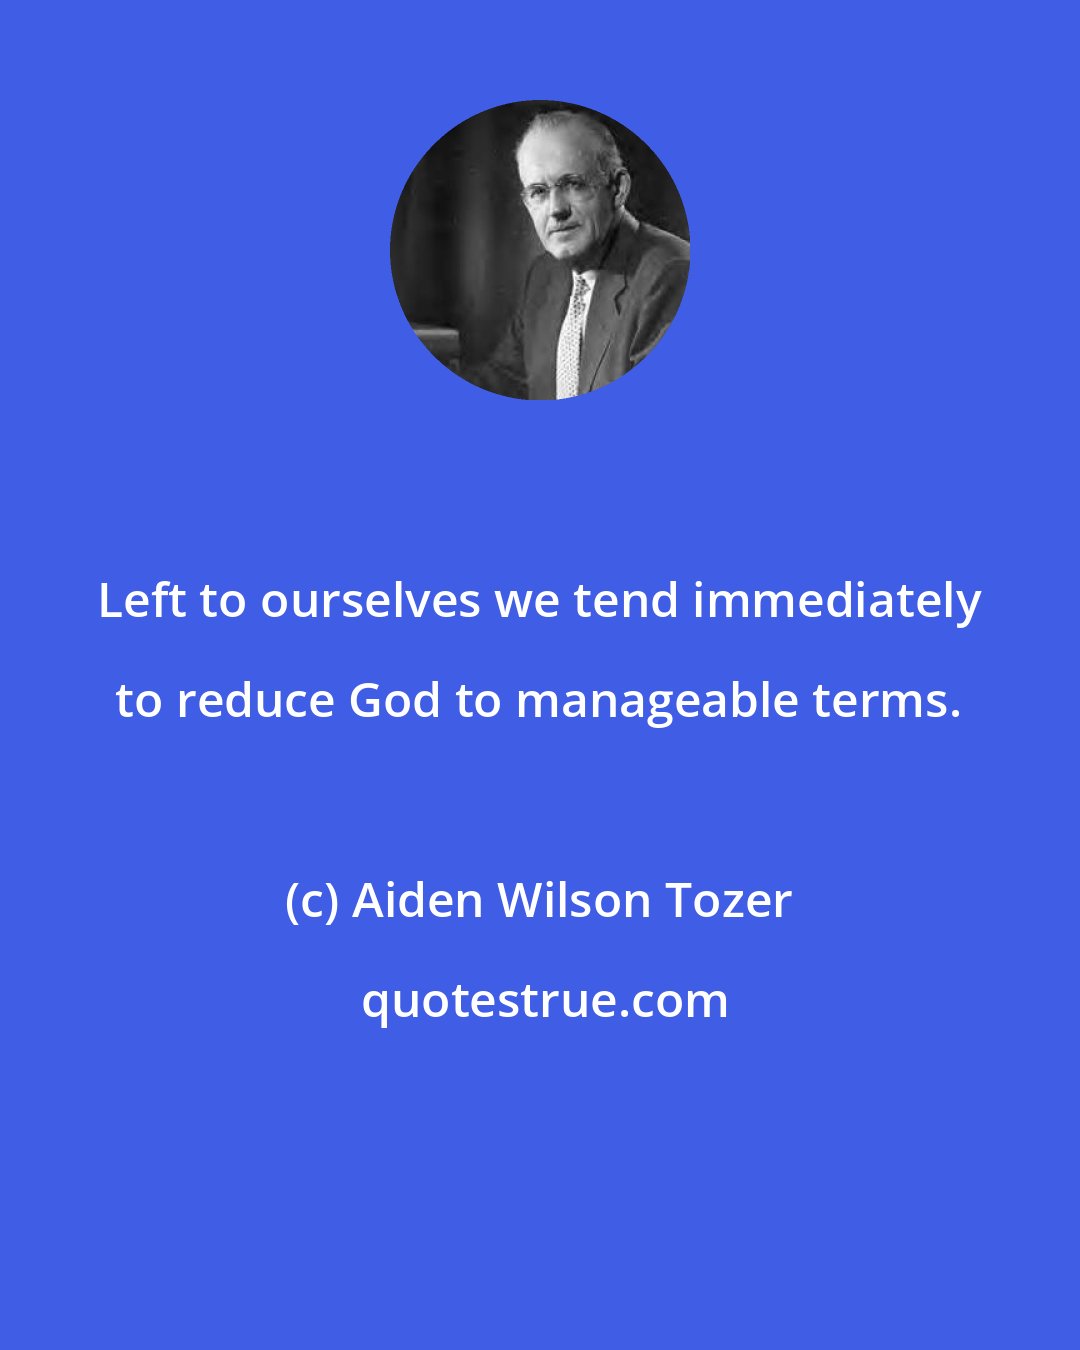 Aiden Wilson Tozer: Left to ourselves we tend immediately to reduce God to manageable terms.